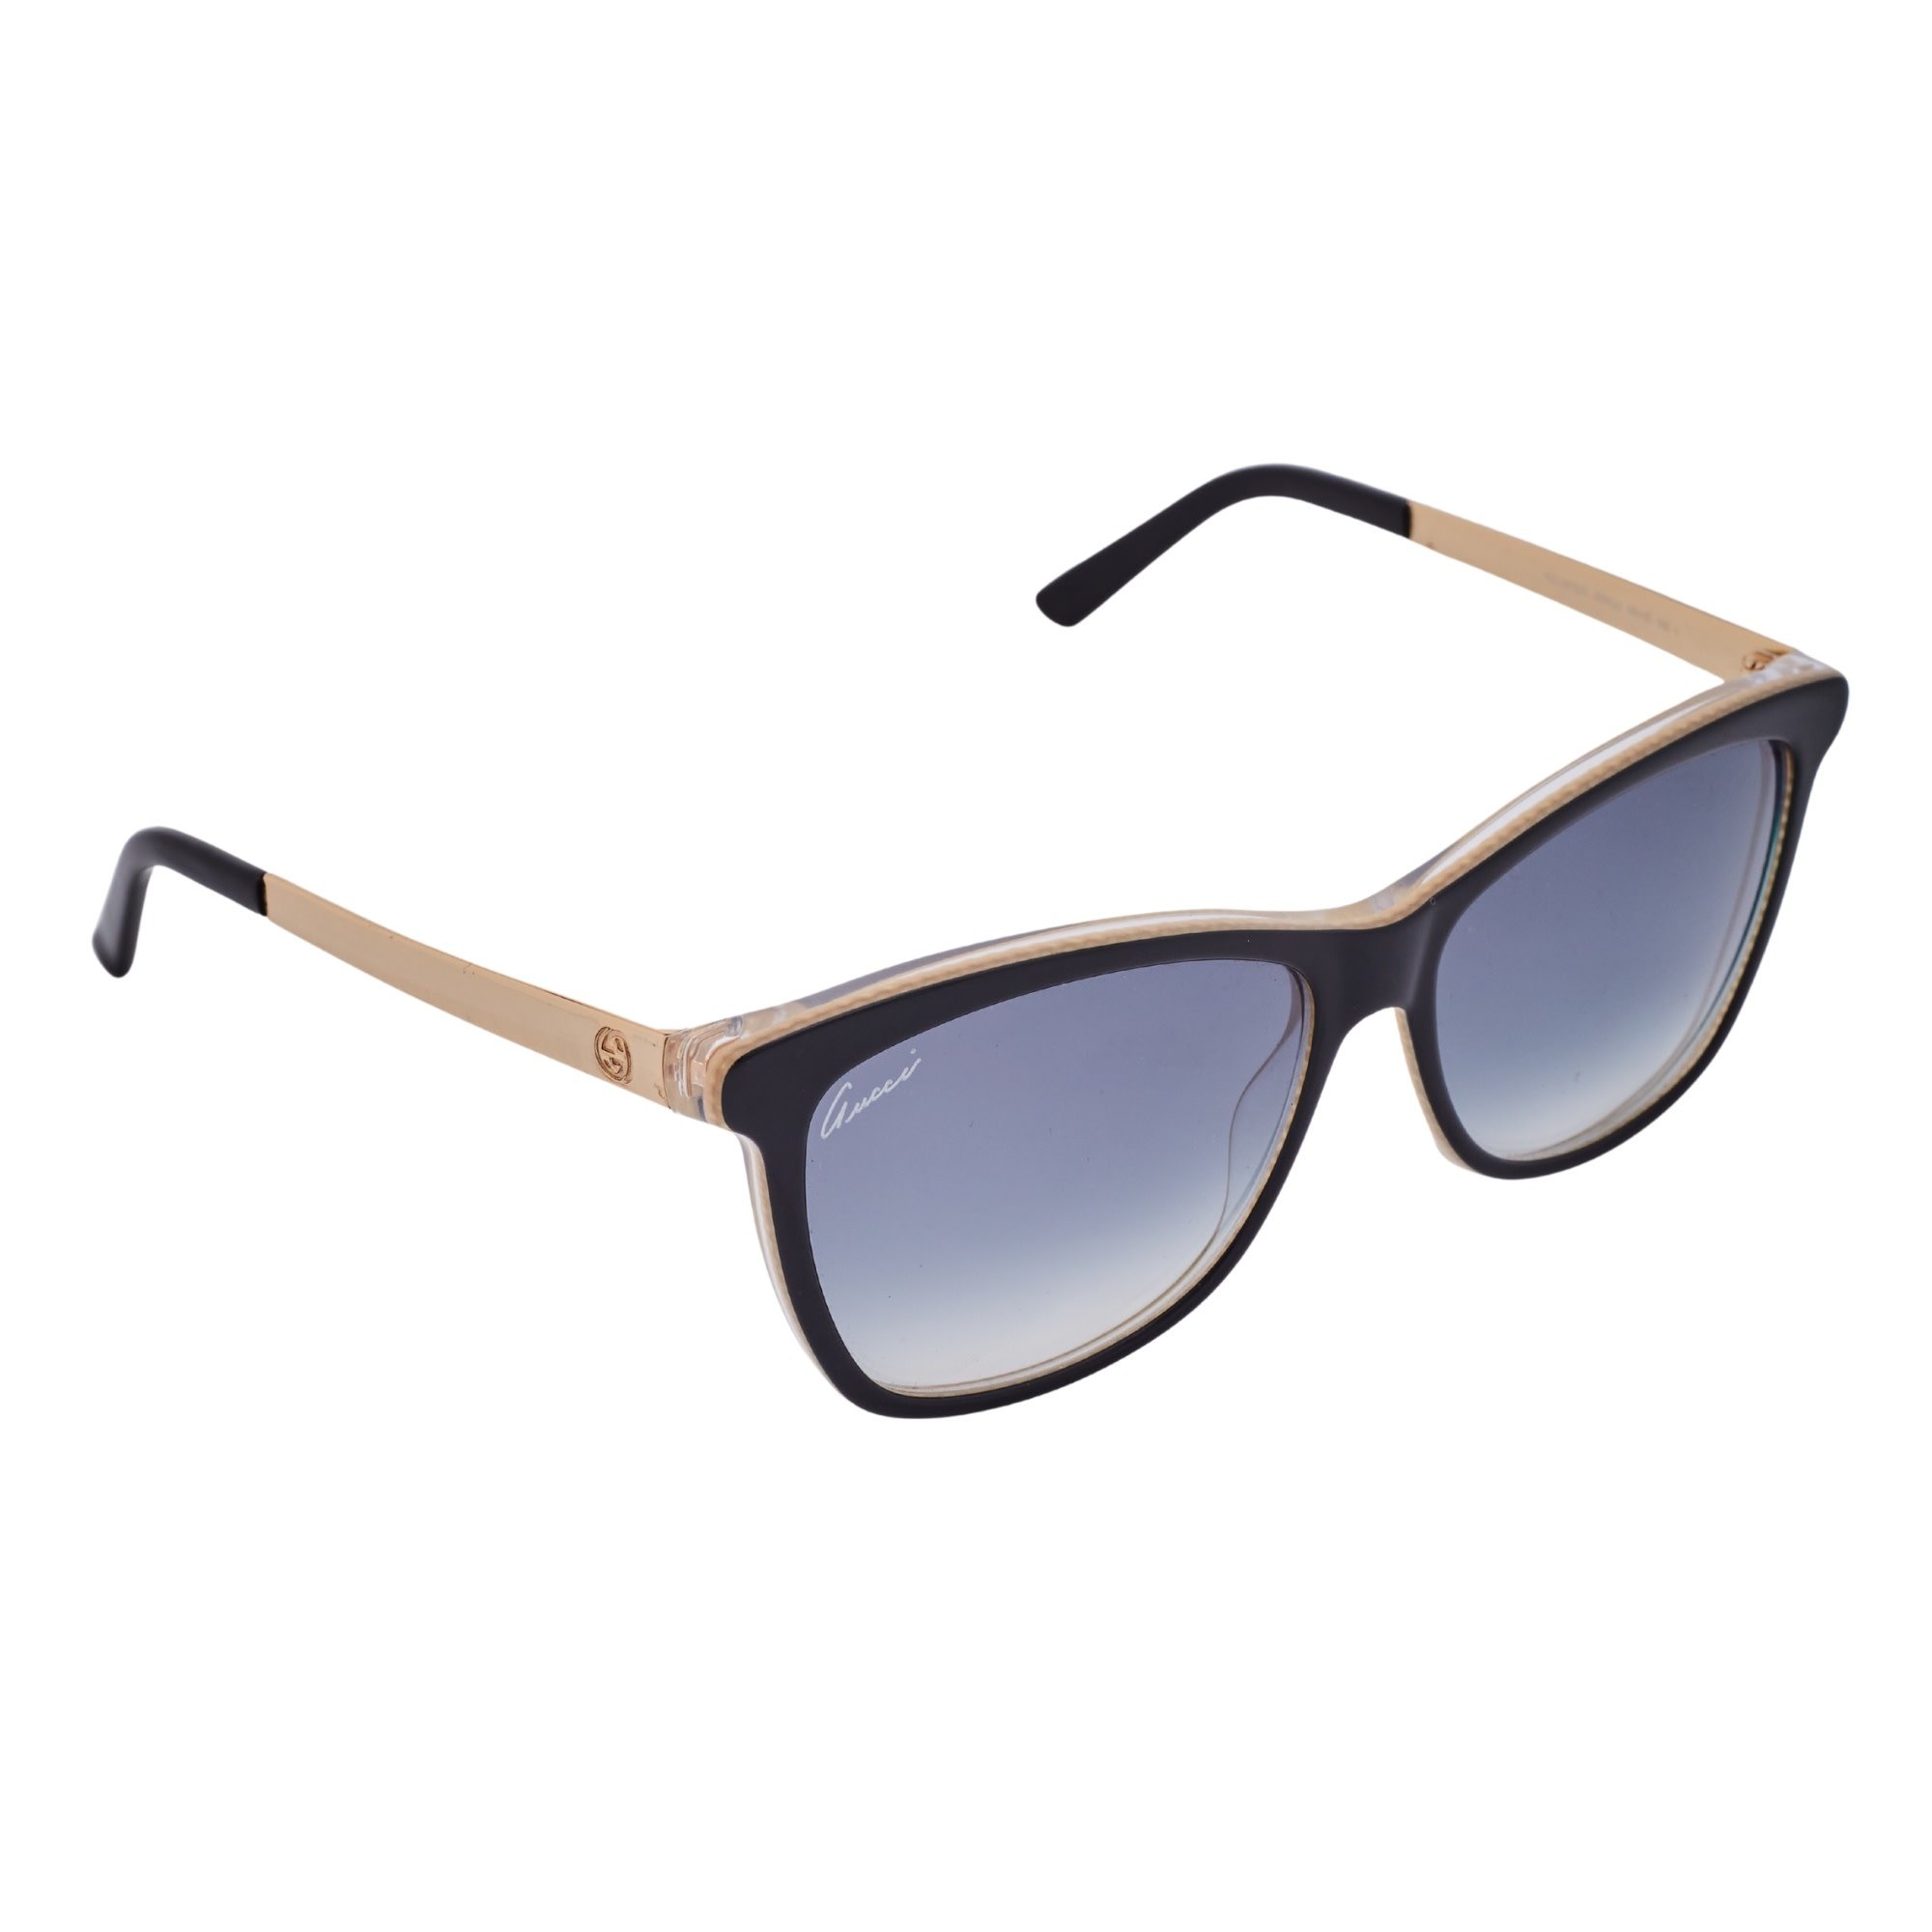 GUCCI GOLD AND BLACK FRAME SUNGLASSES GG 3675/S